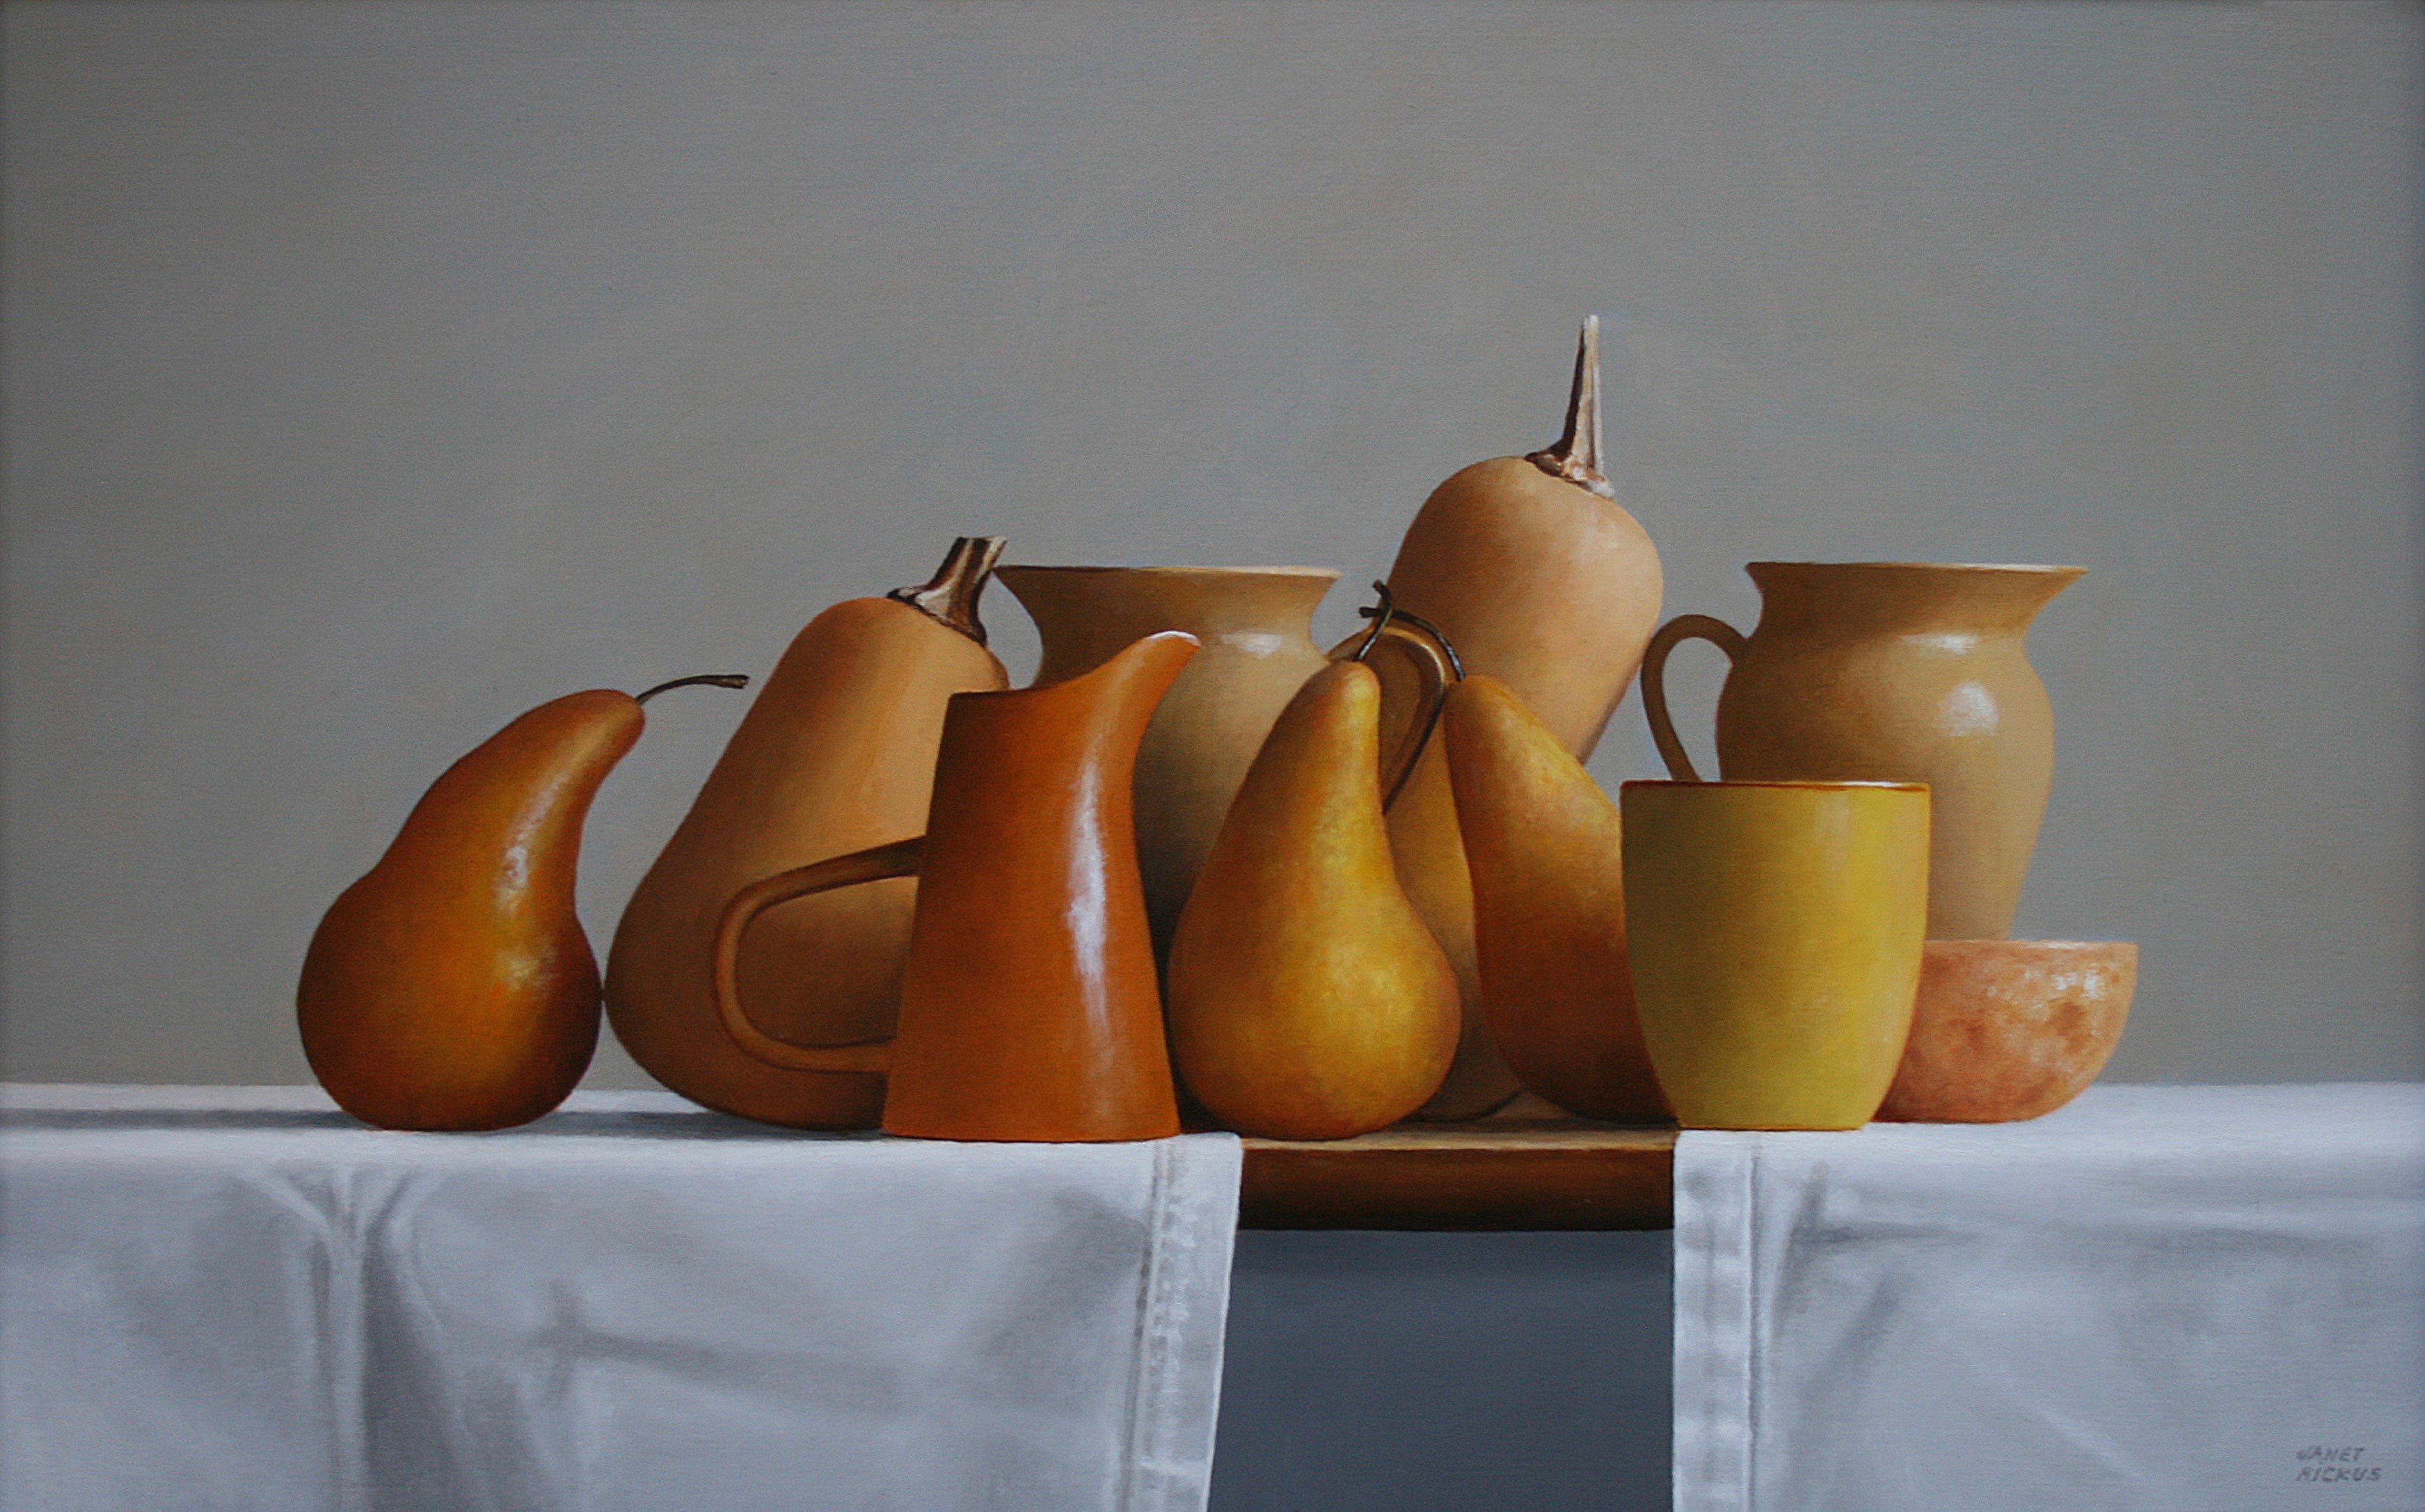 REORGANIZING, still life with fruit, hyper-realism